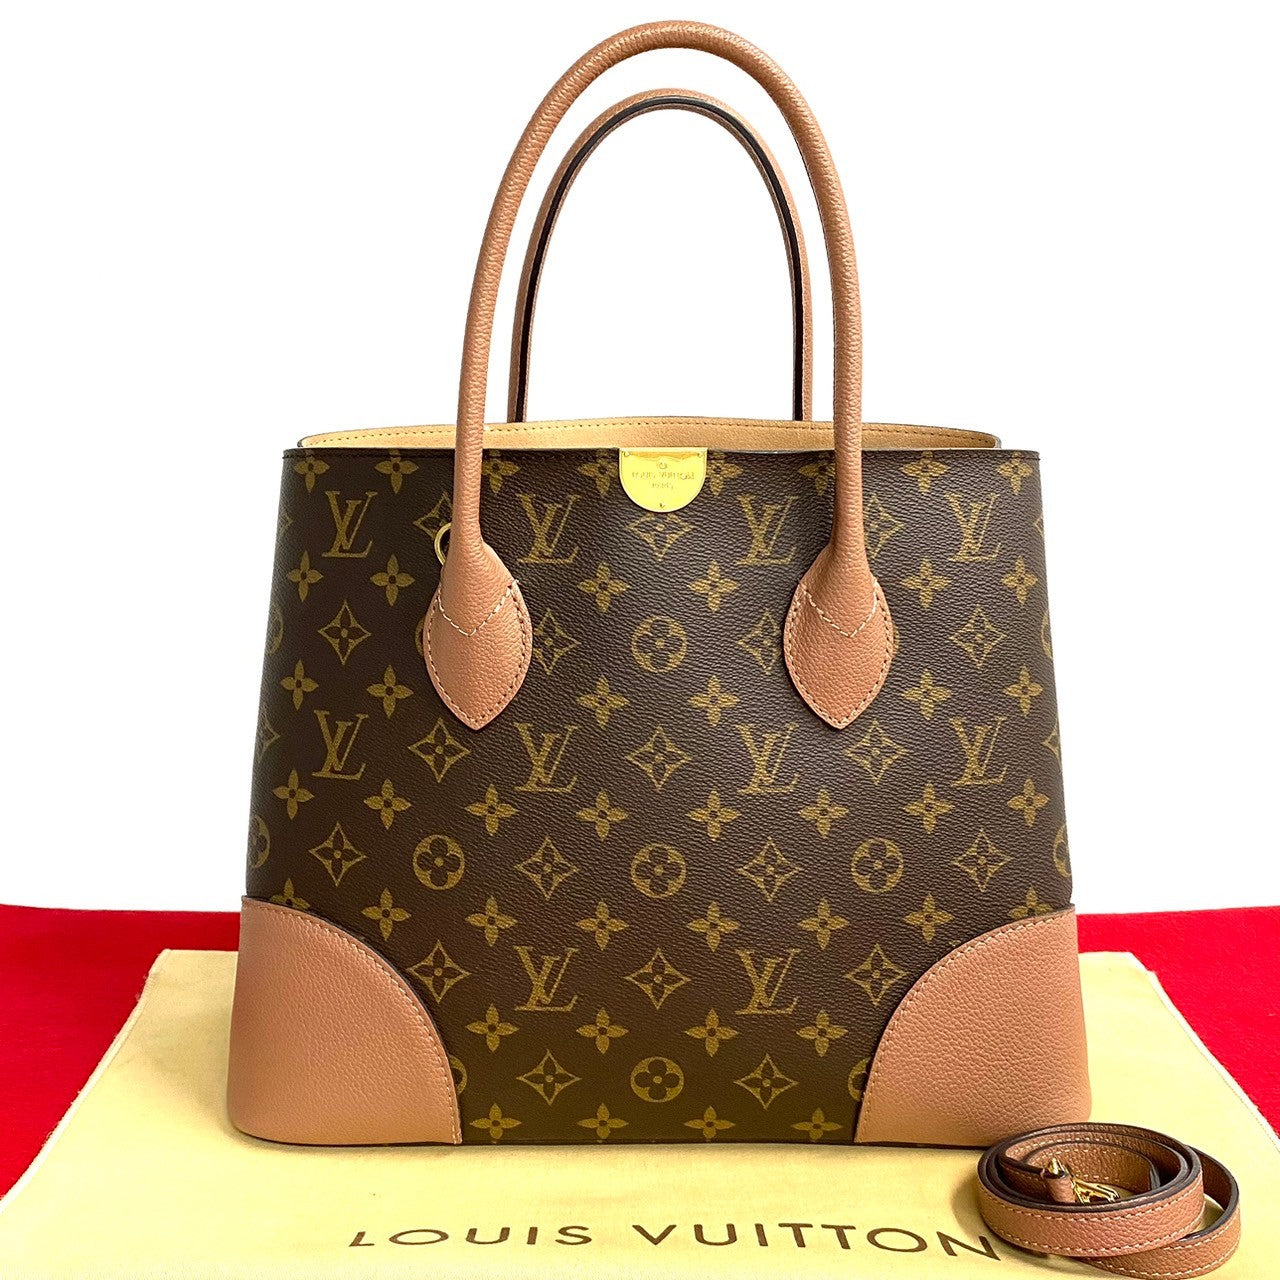 Louis Vuitton Flandrin Canvas Tote Bag M41596 in Excellent condition